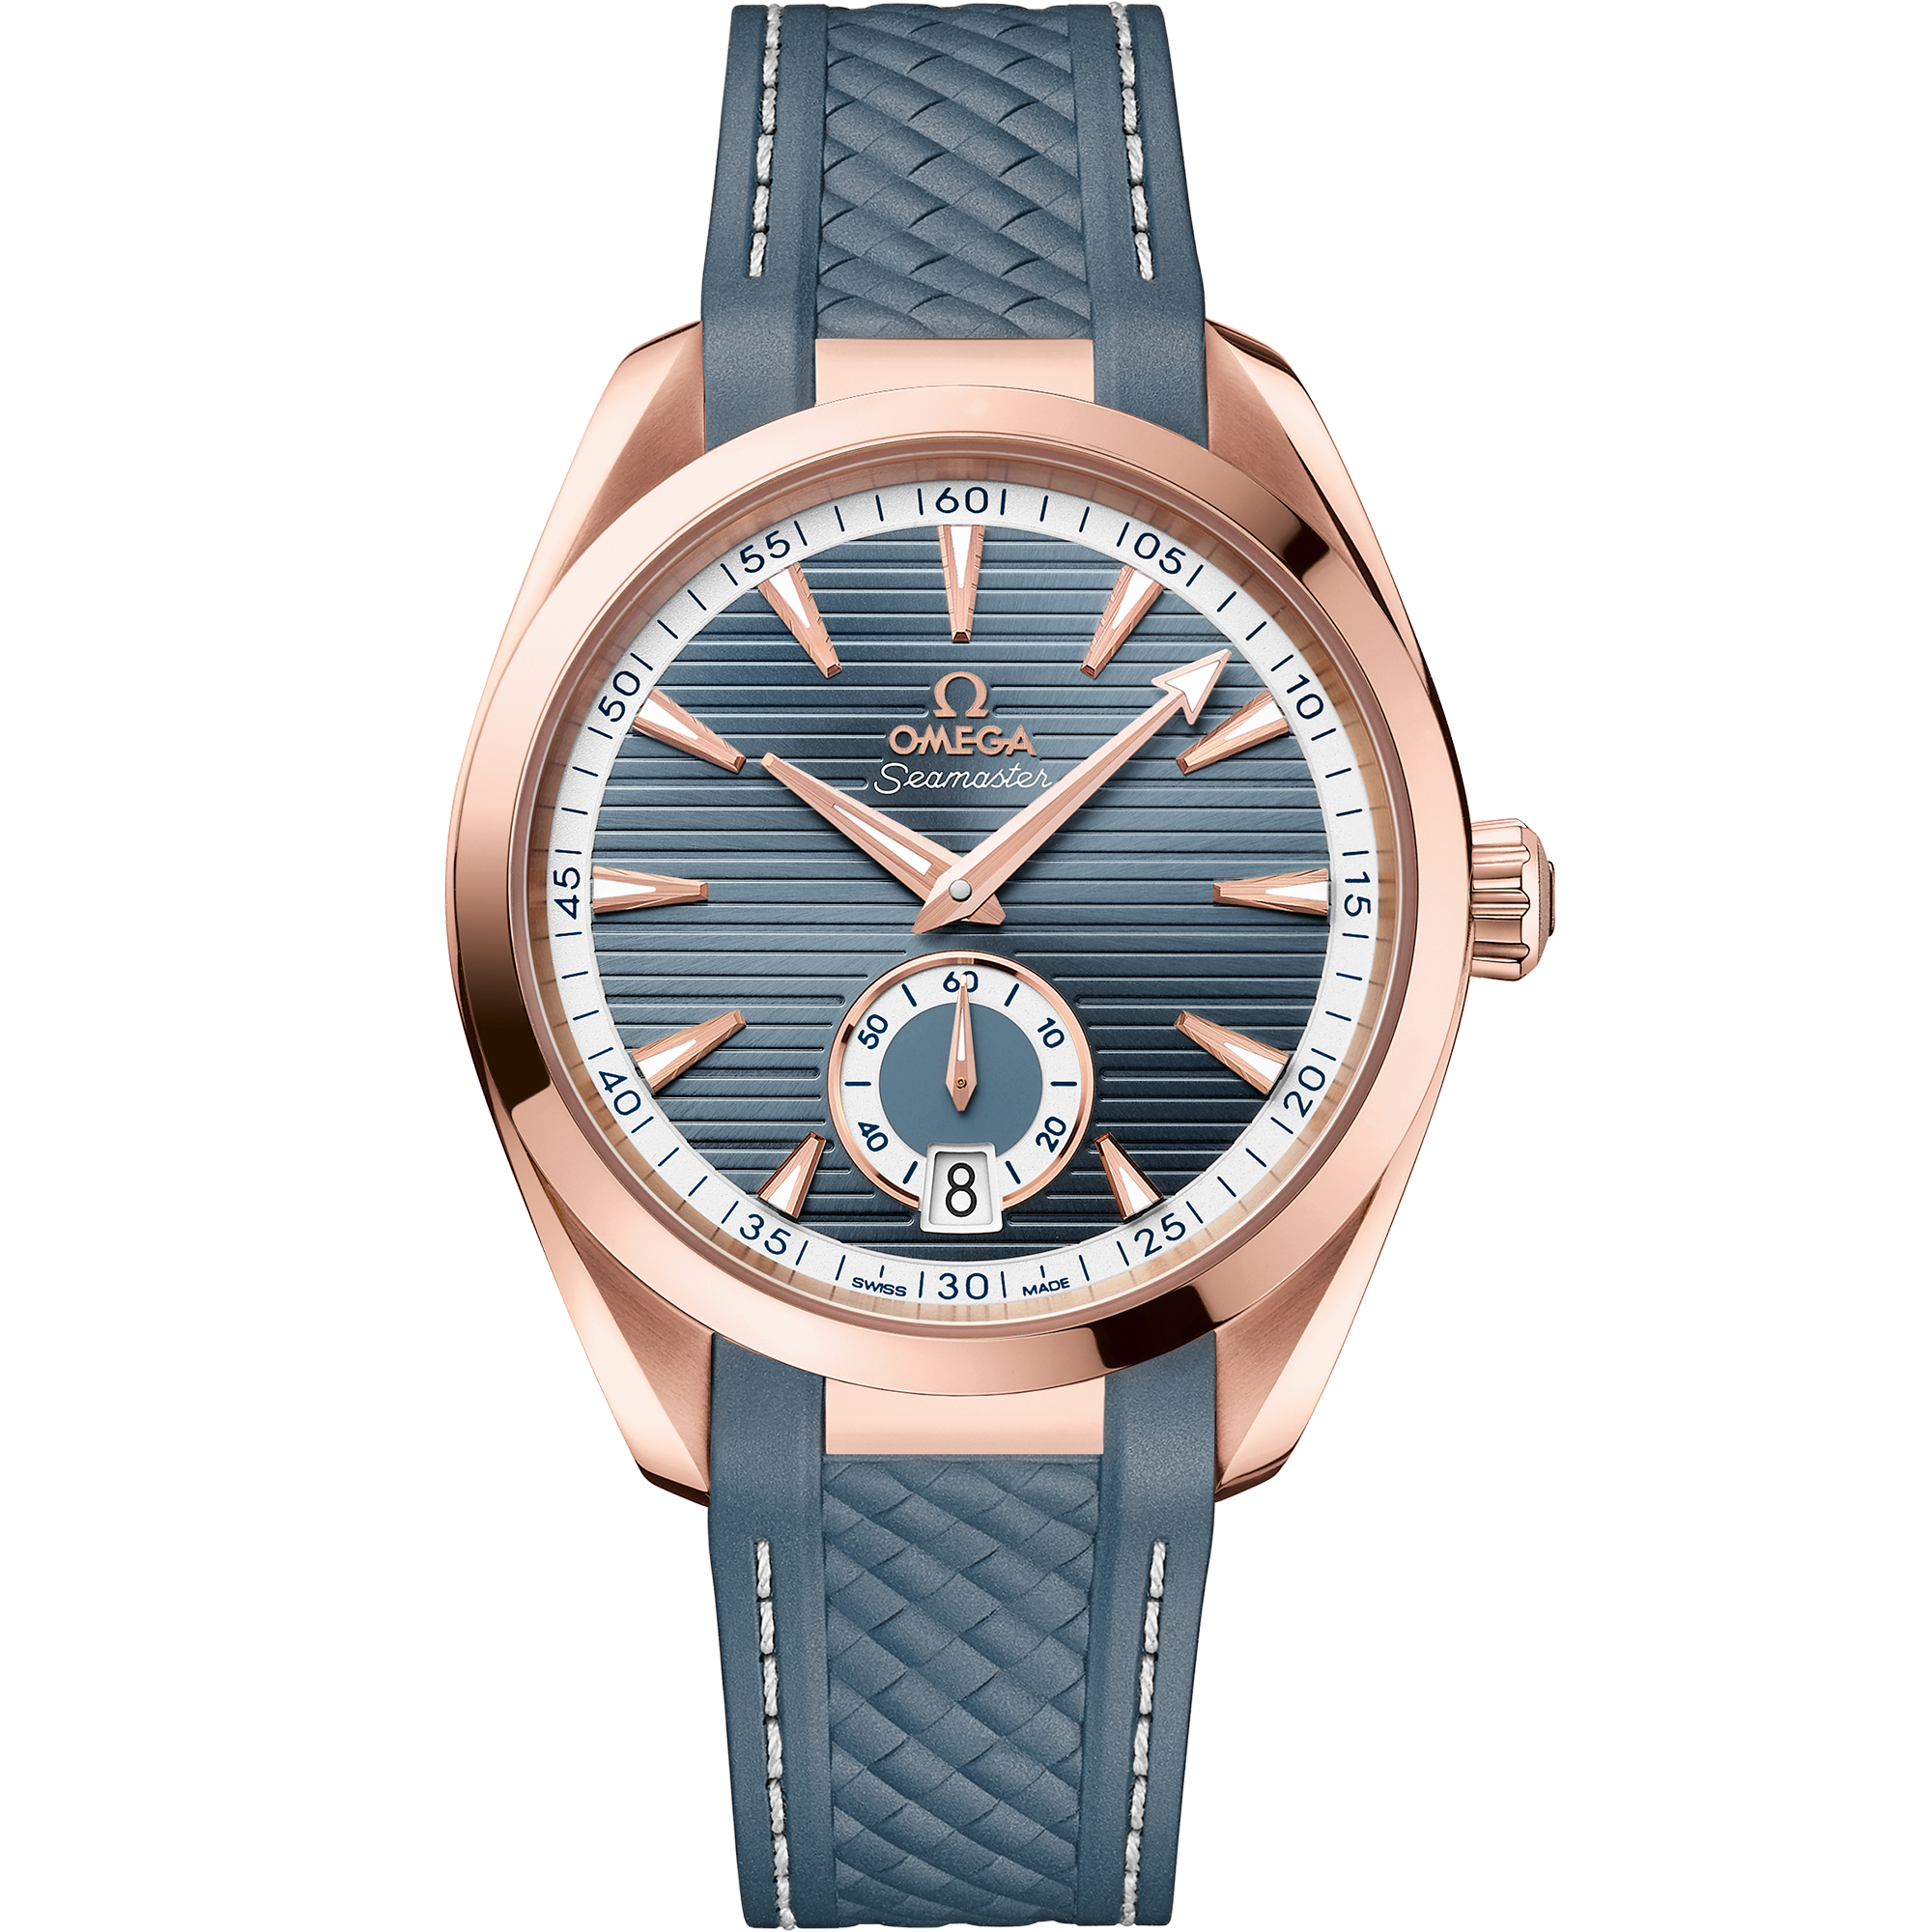 Seamaster 41 mm, Sedna™ gold on rubber strap - 220.52.41.21.03.002